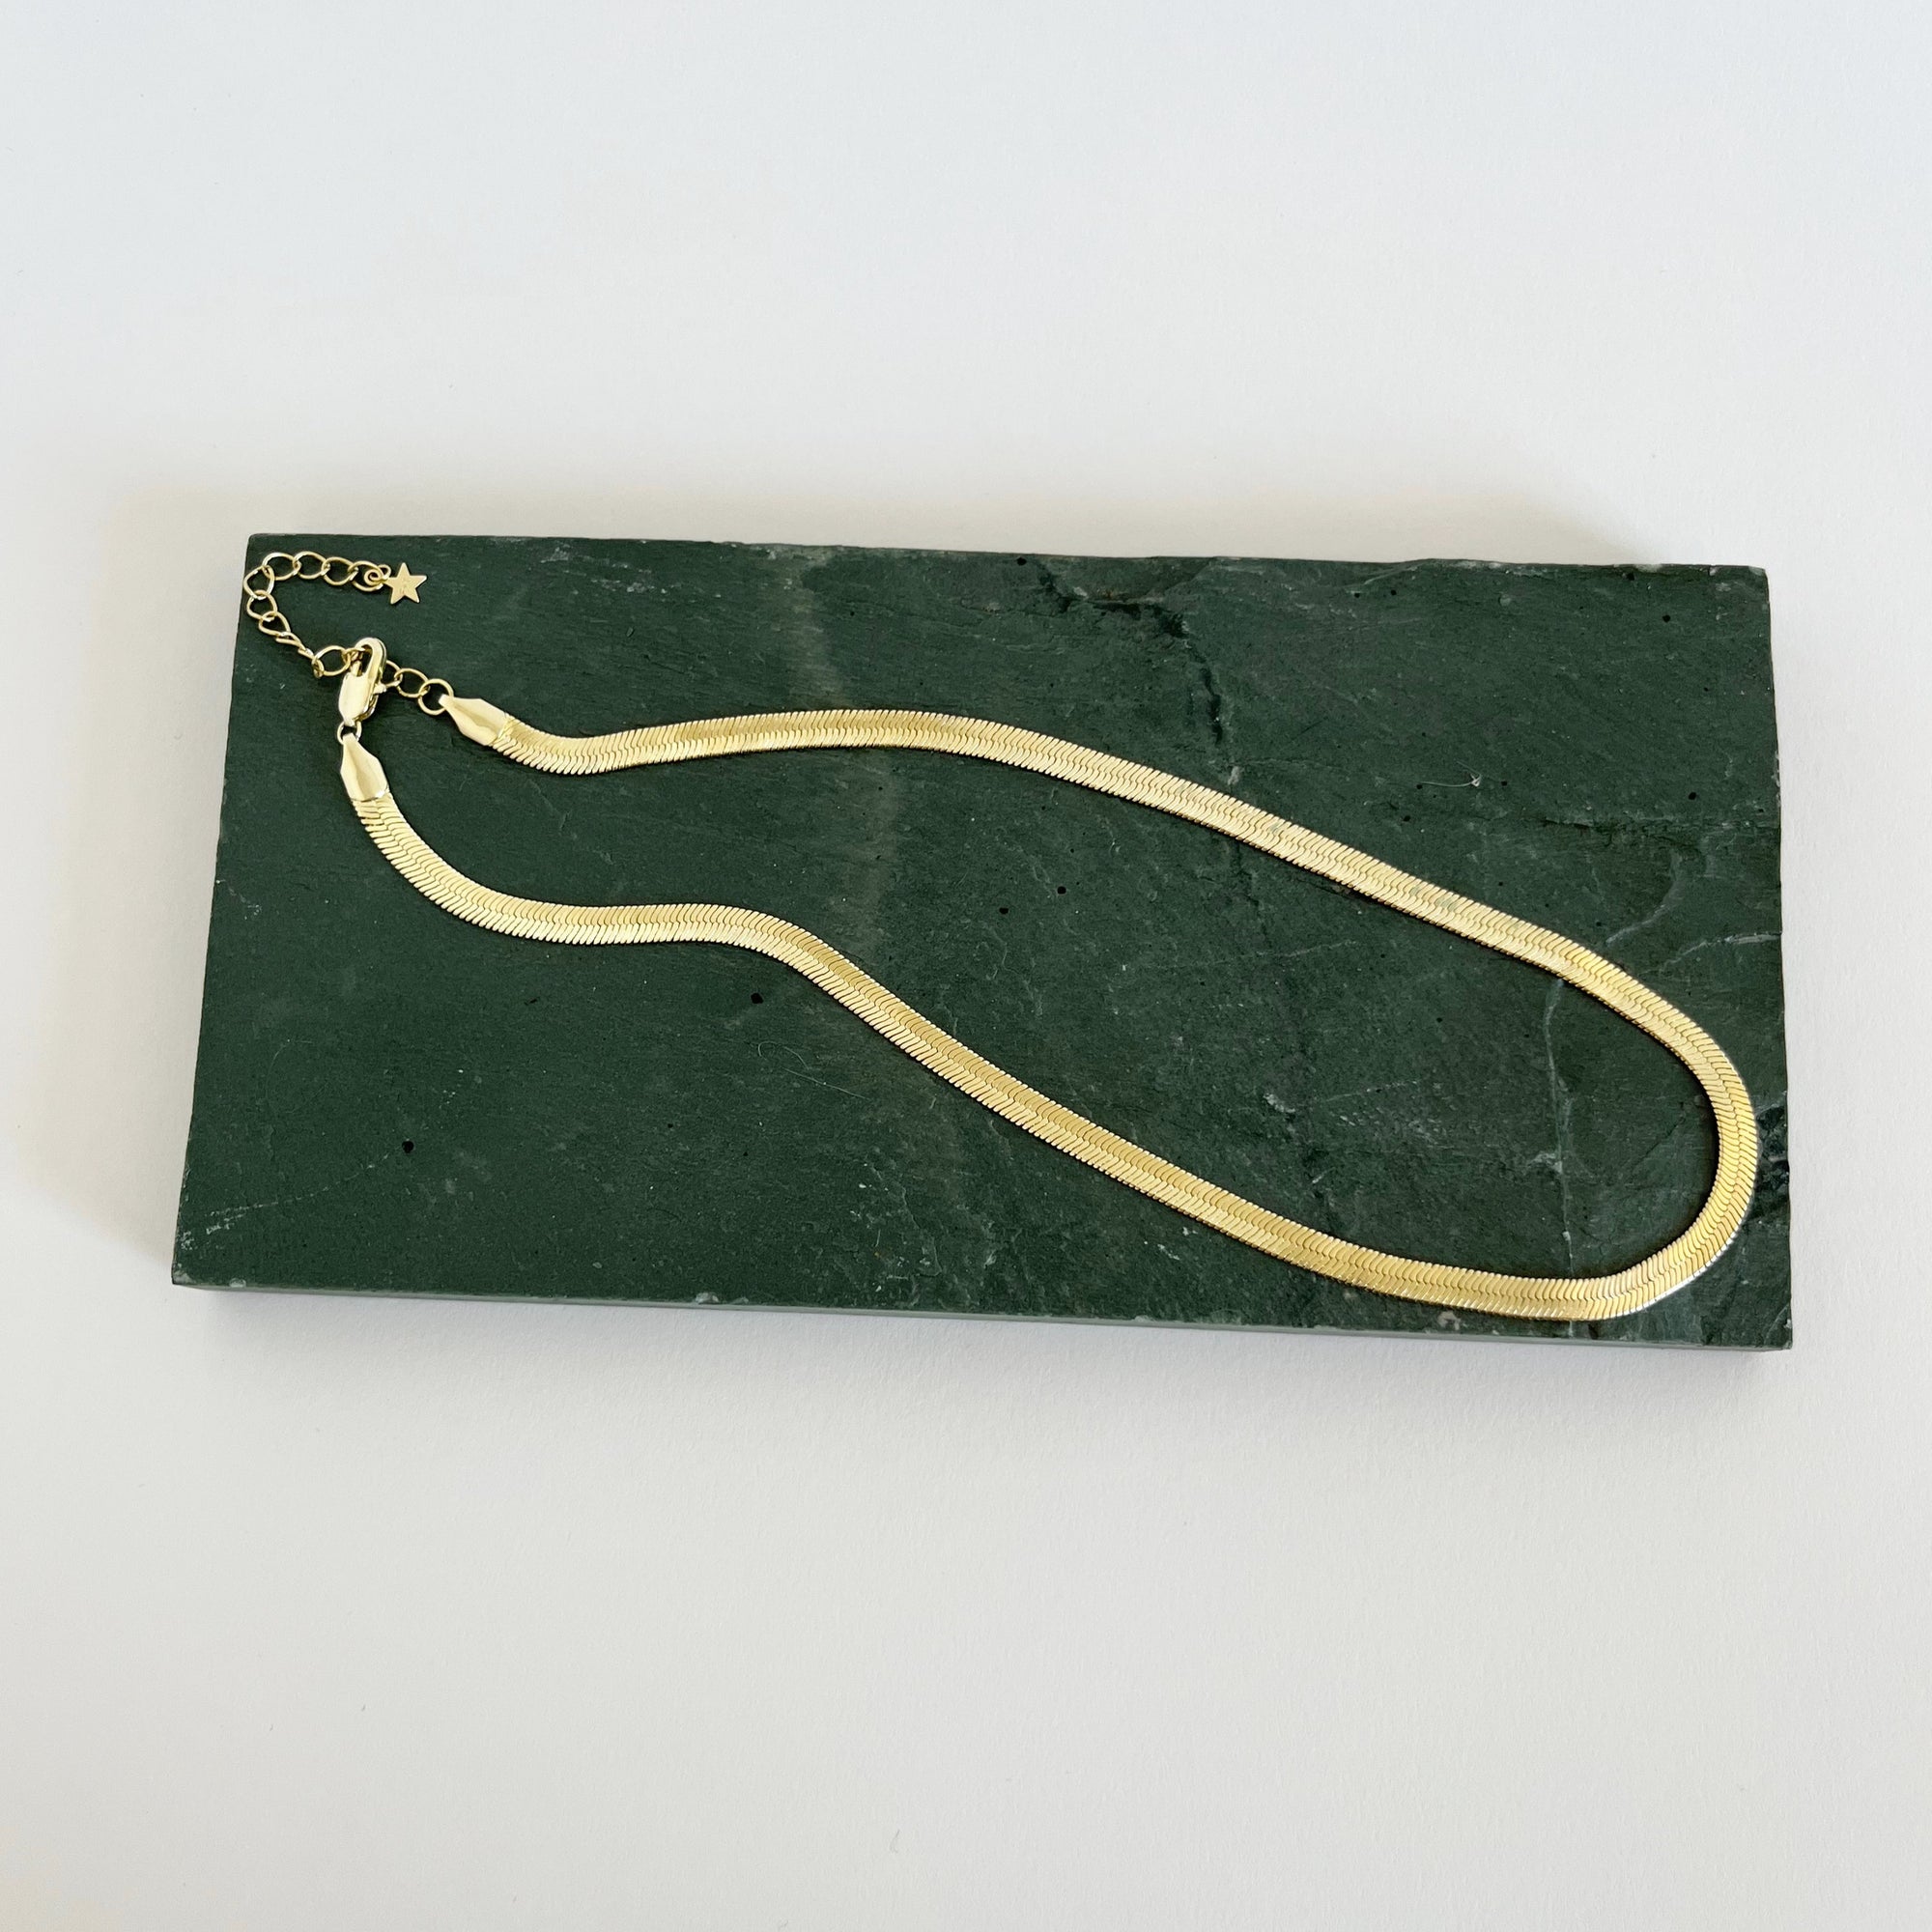 Snake chain necklace in gold on green rock. 